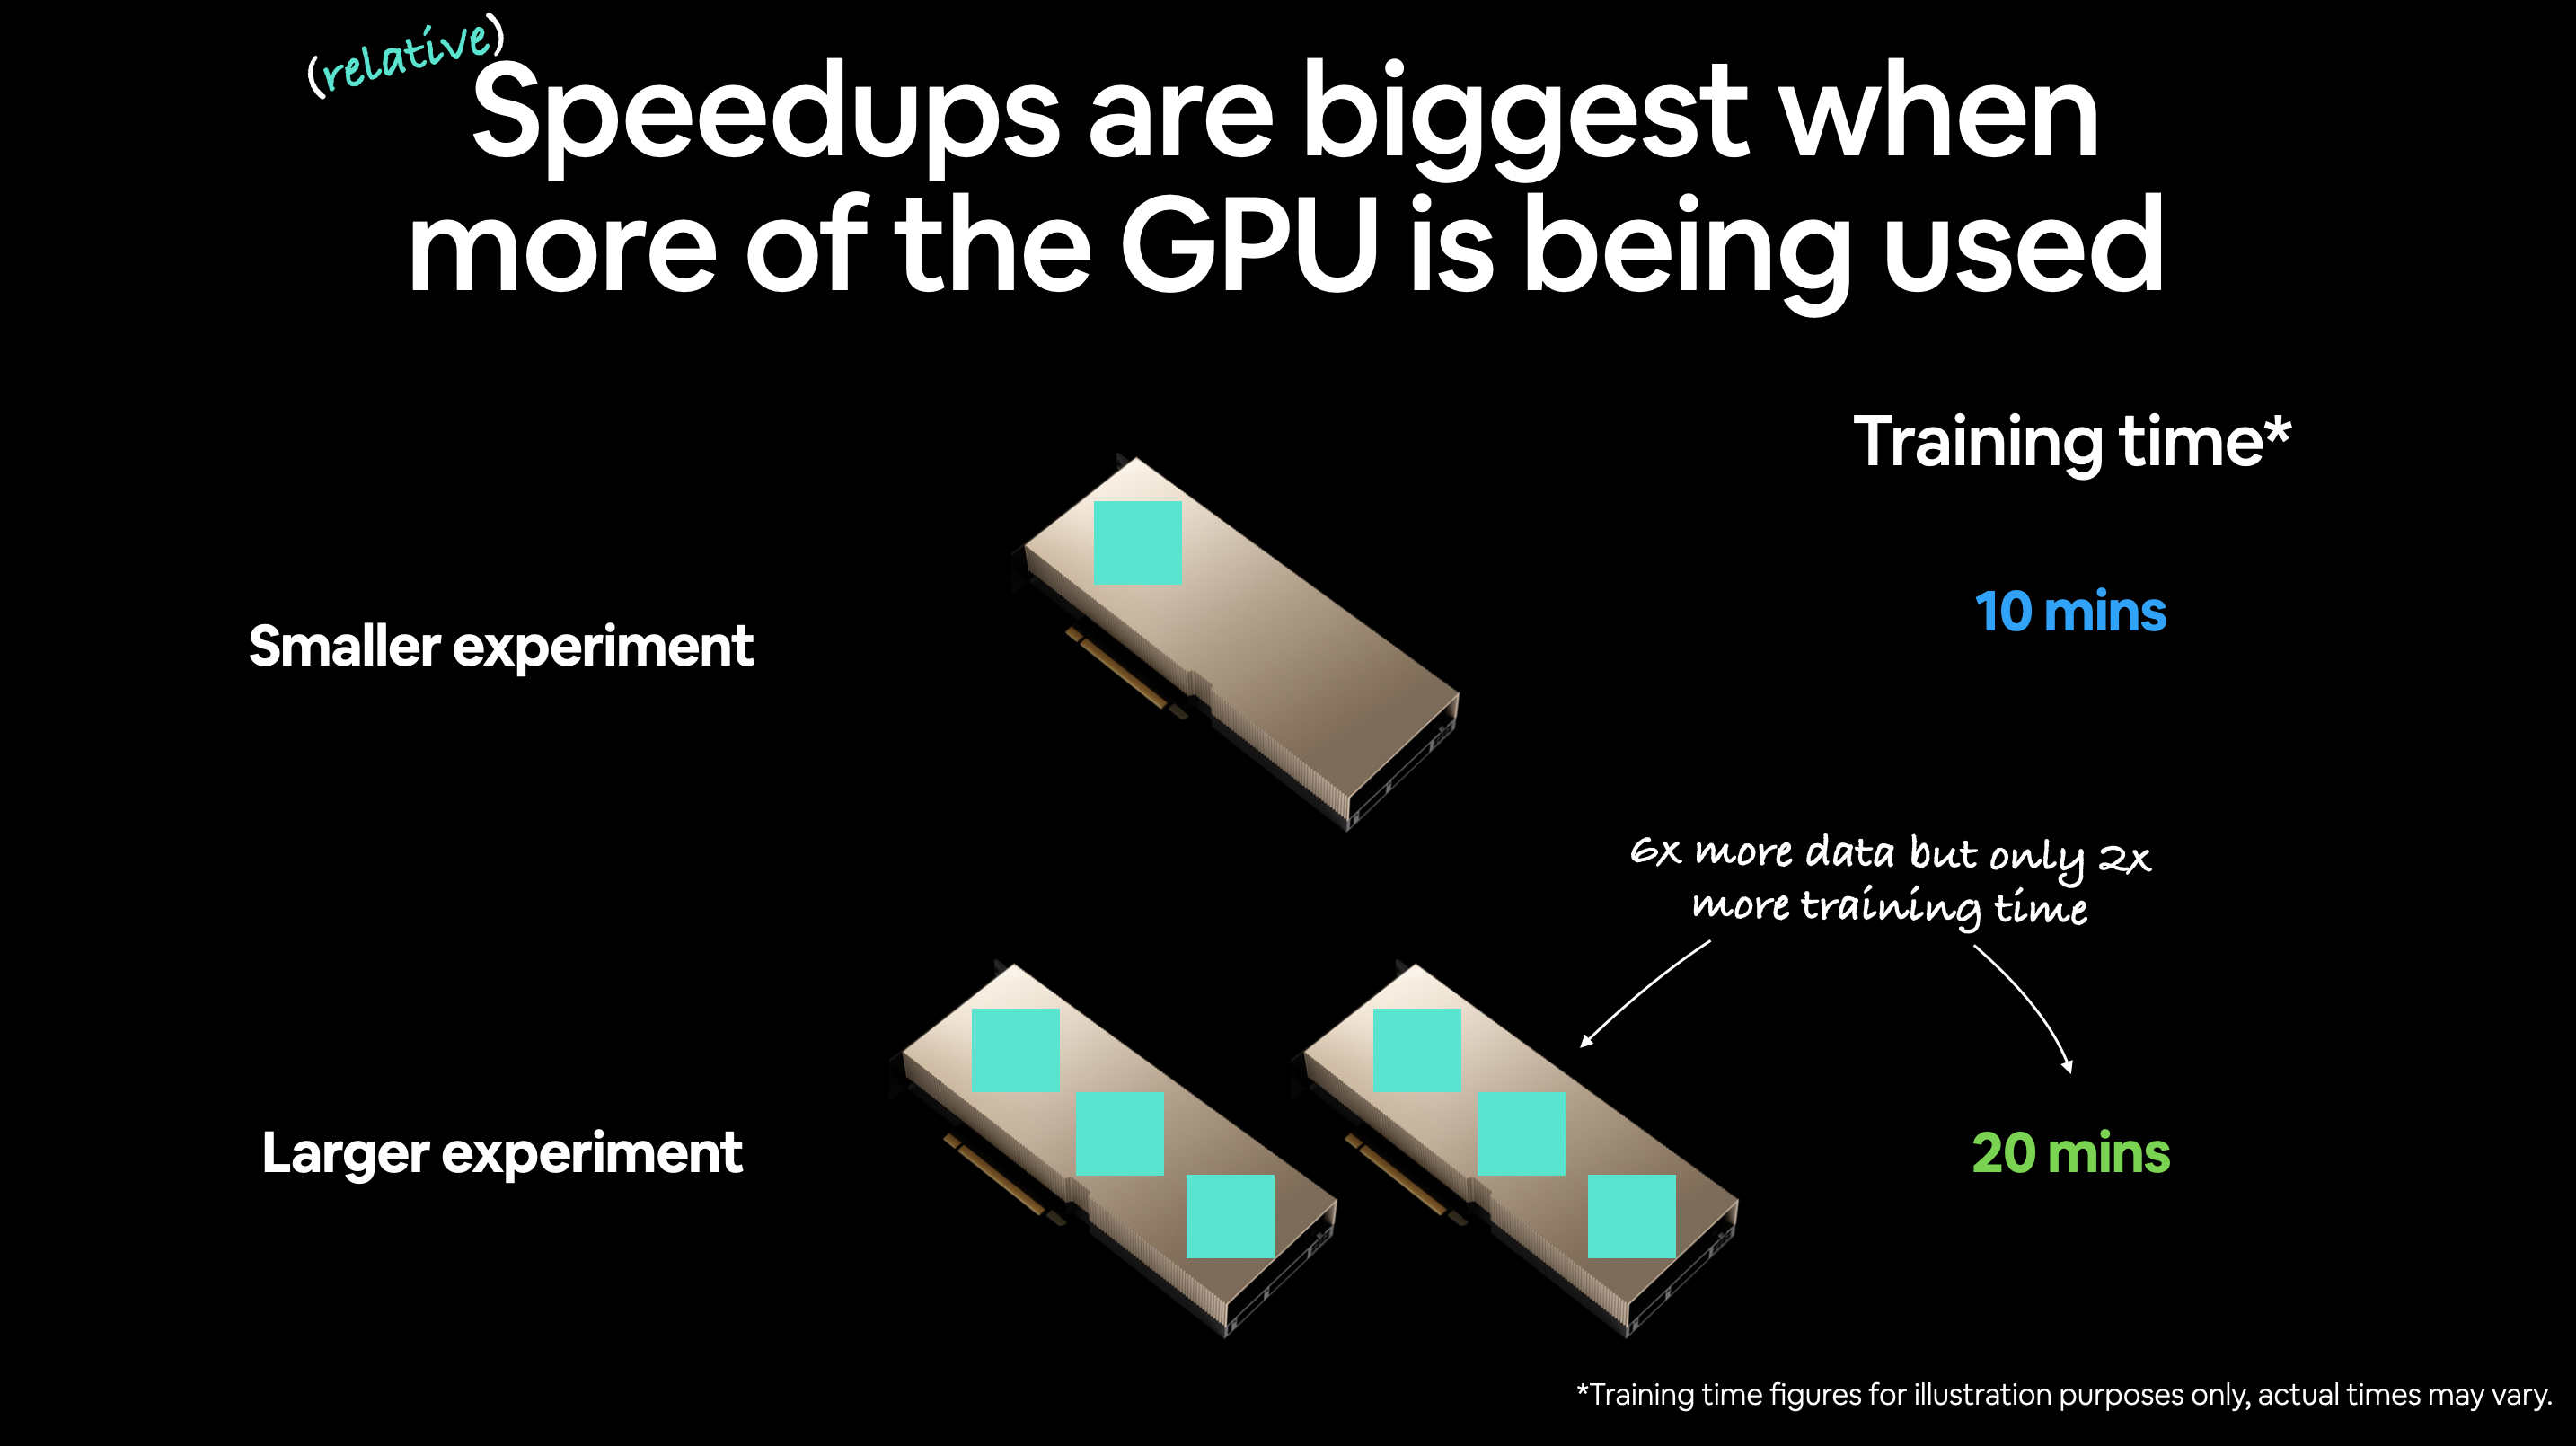 speedups are biggest when more of the GPU is used